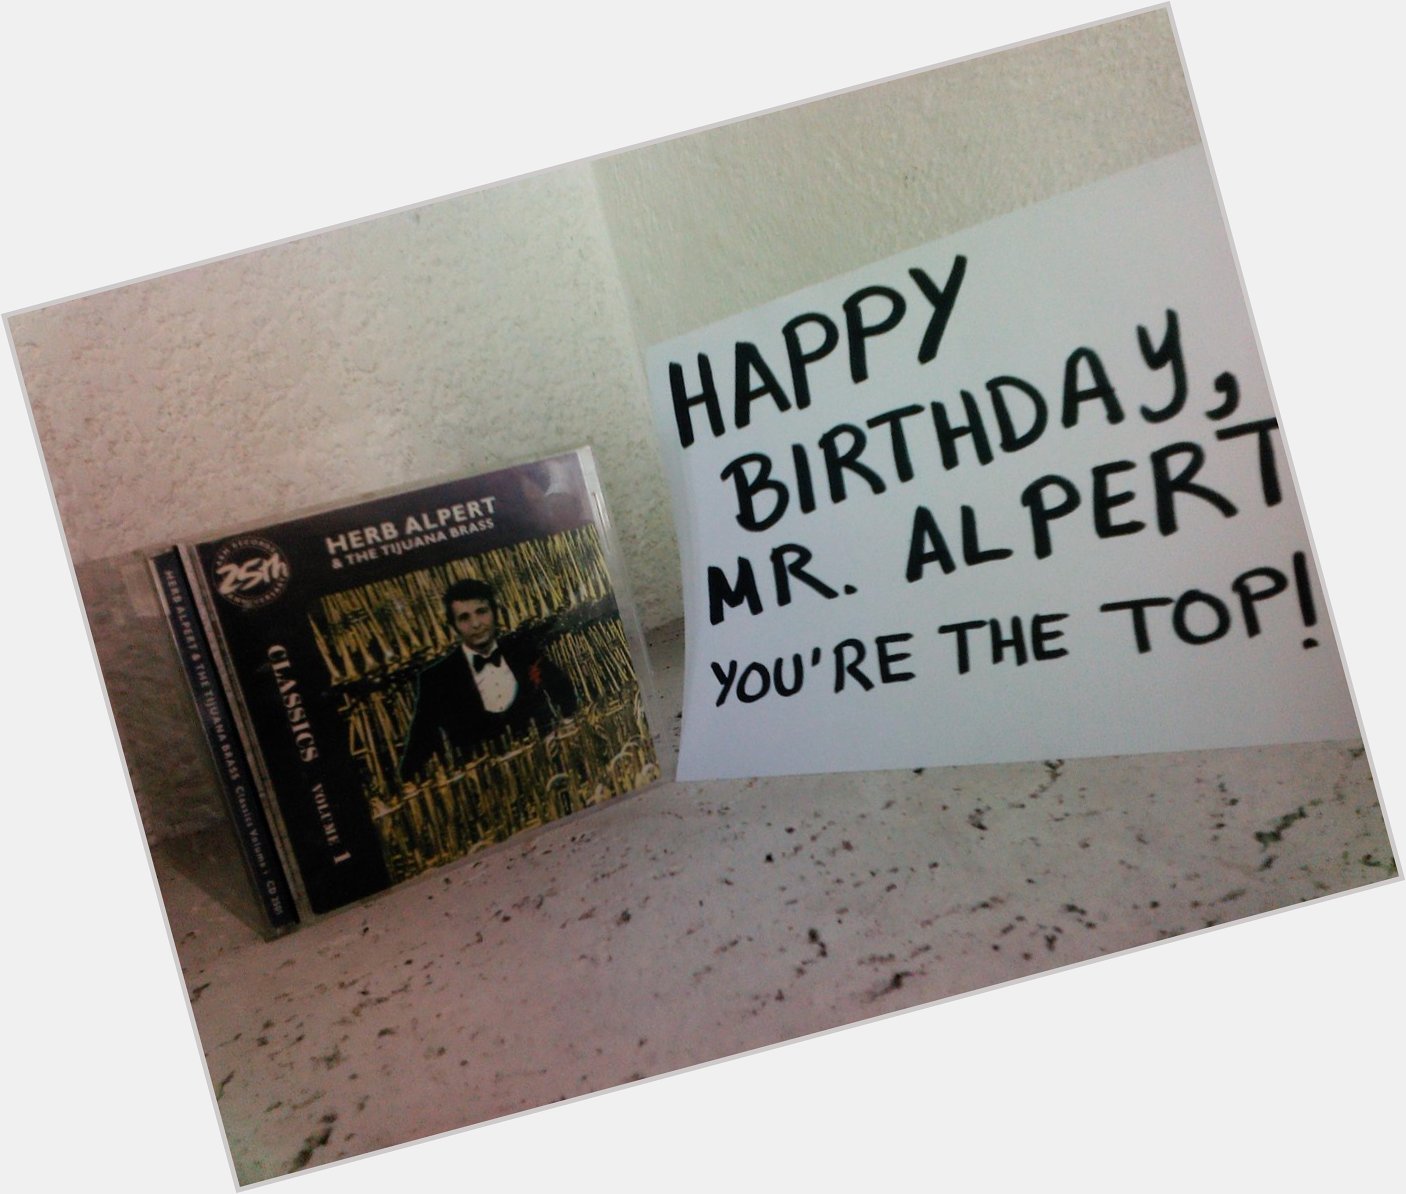  Happy Birthday, and many happy returns, Mr. Herb Alpert!  I\m your # 1 fan down in Mexico. Greetings! 